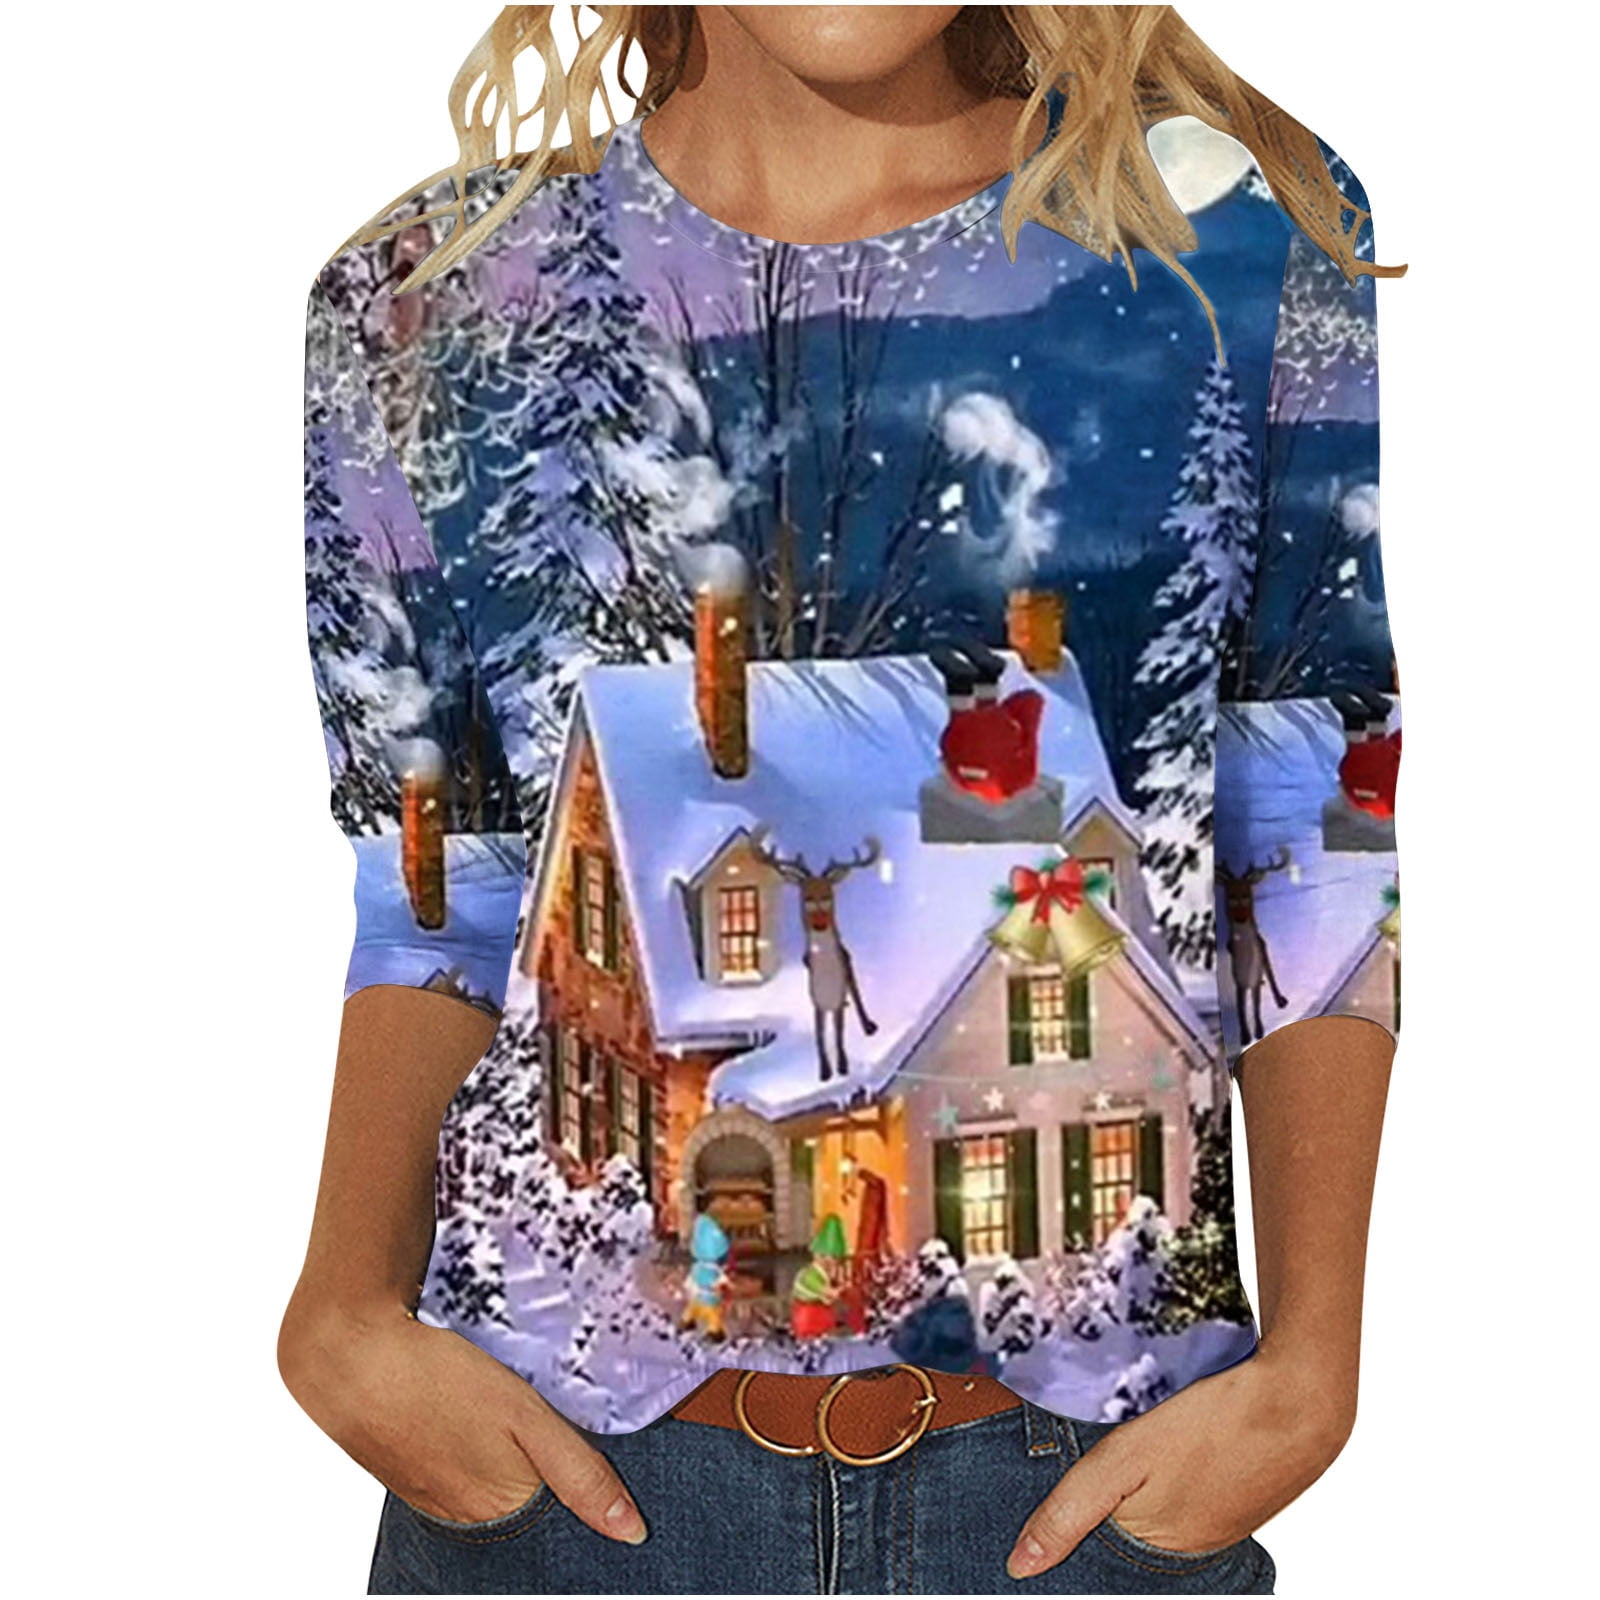 Lighten Deals of The Day Christmas Tree Topper Hawaiian Shirts for Girls  Tight Shirts for Women Christmas Sweater for Women Cute New Christmas Tops